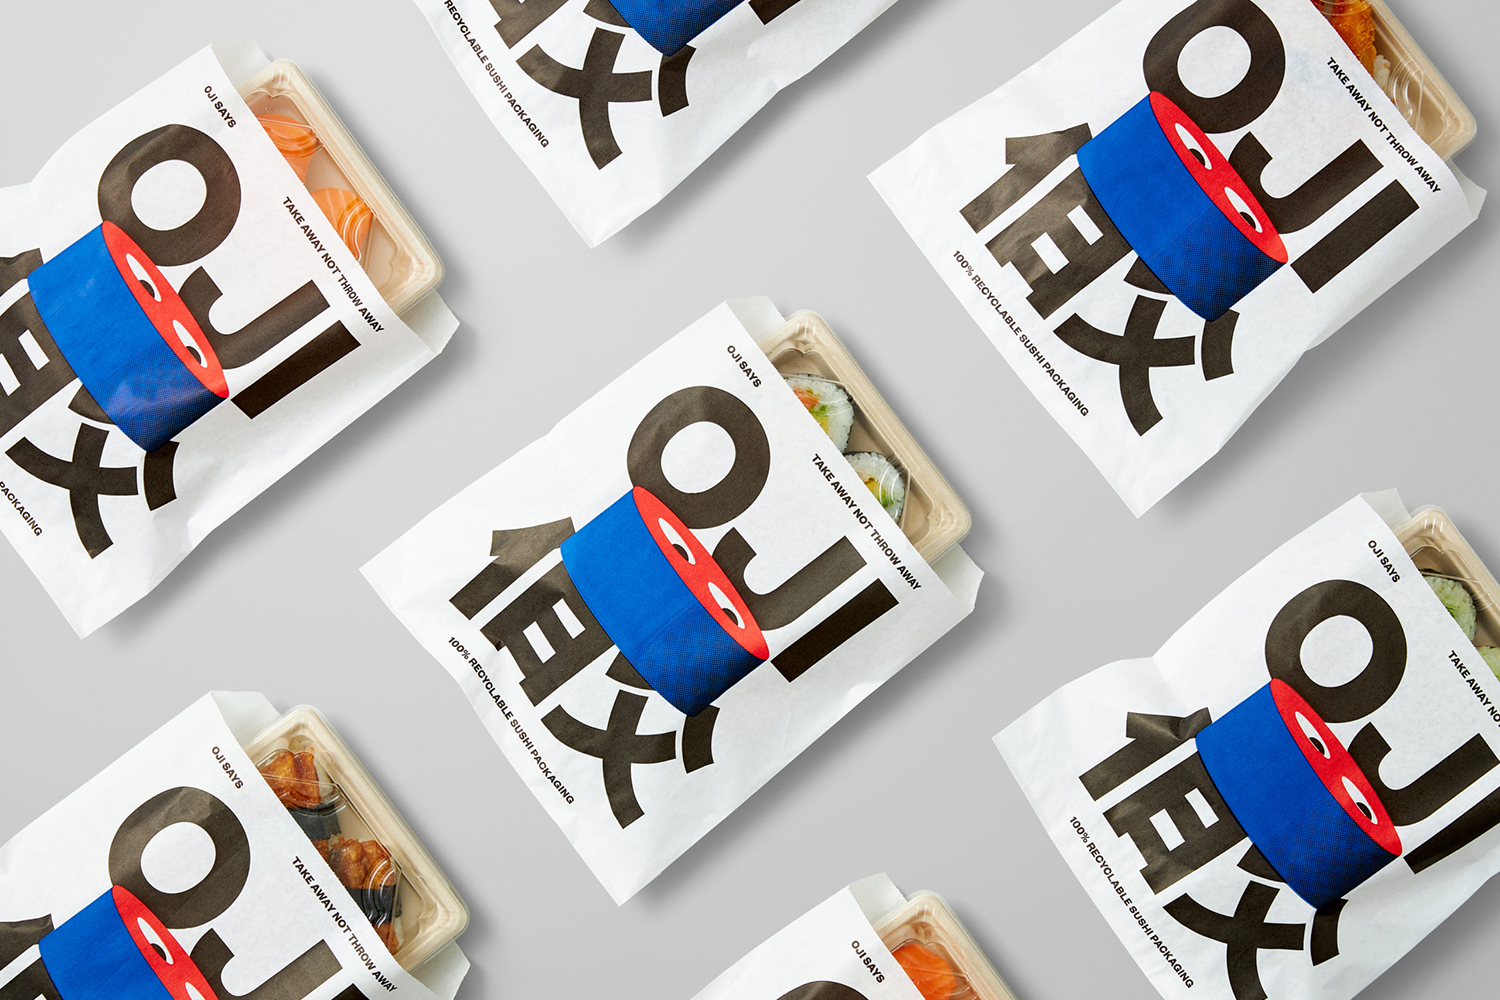 Logo, packaging, menus, signage and motion graphics by Seachange for Auckland-based Oji Sushi